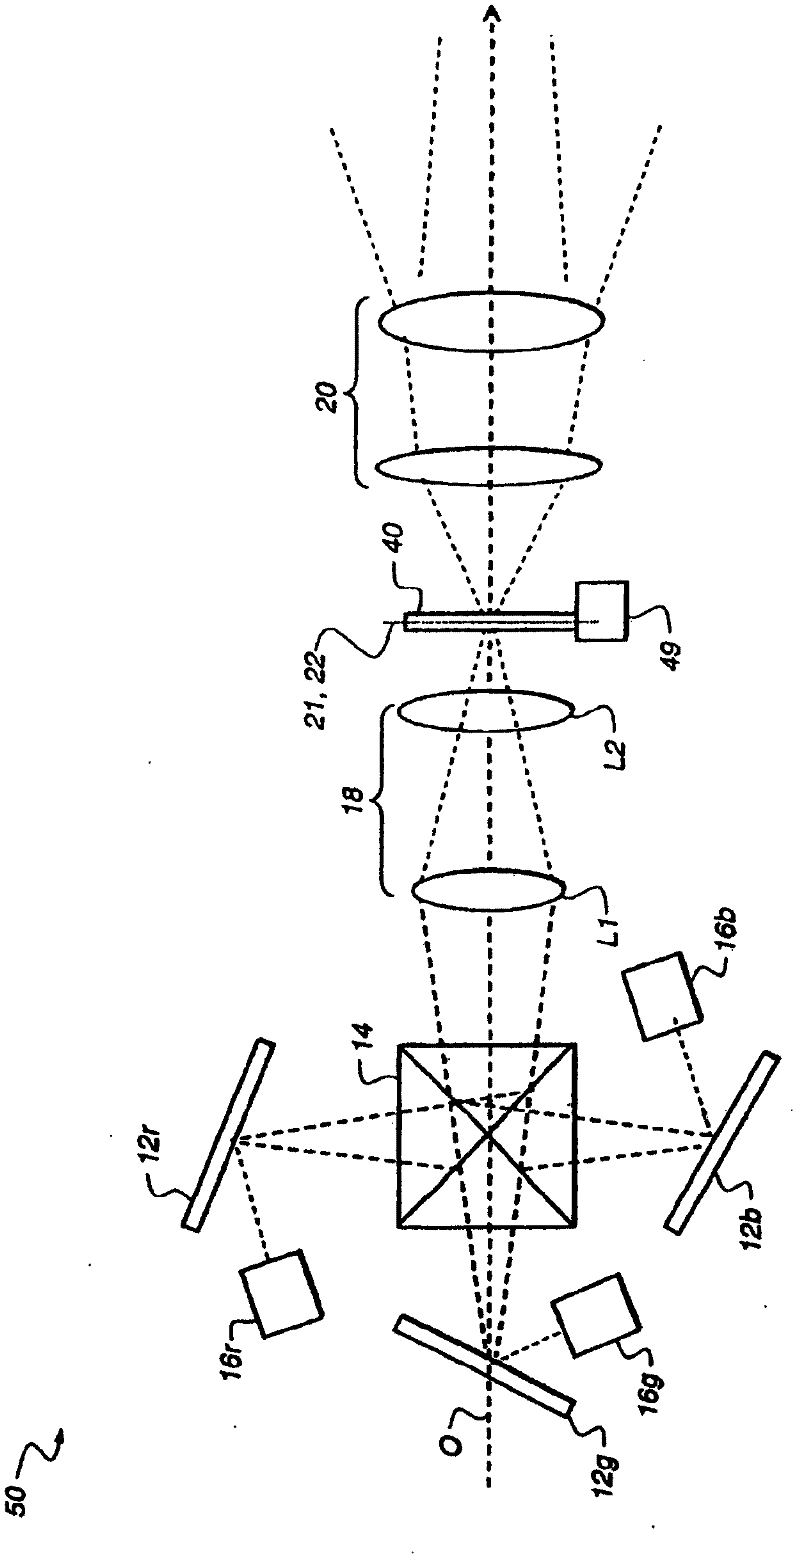 Optical laser projection system with speckle reduction element configured for out-of-plane motion